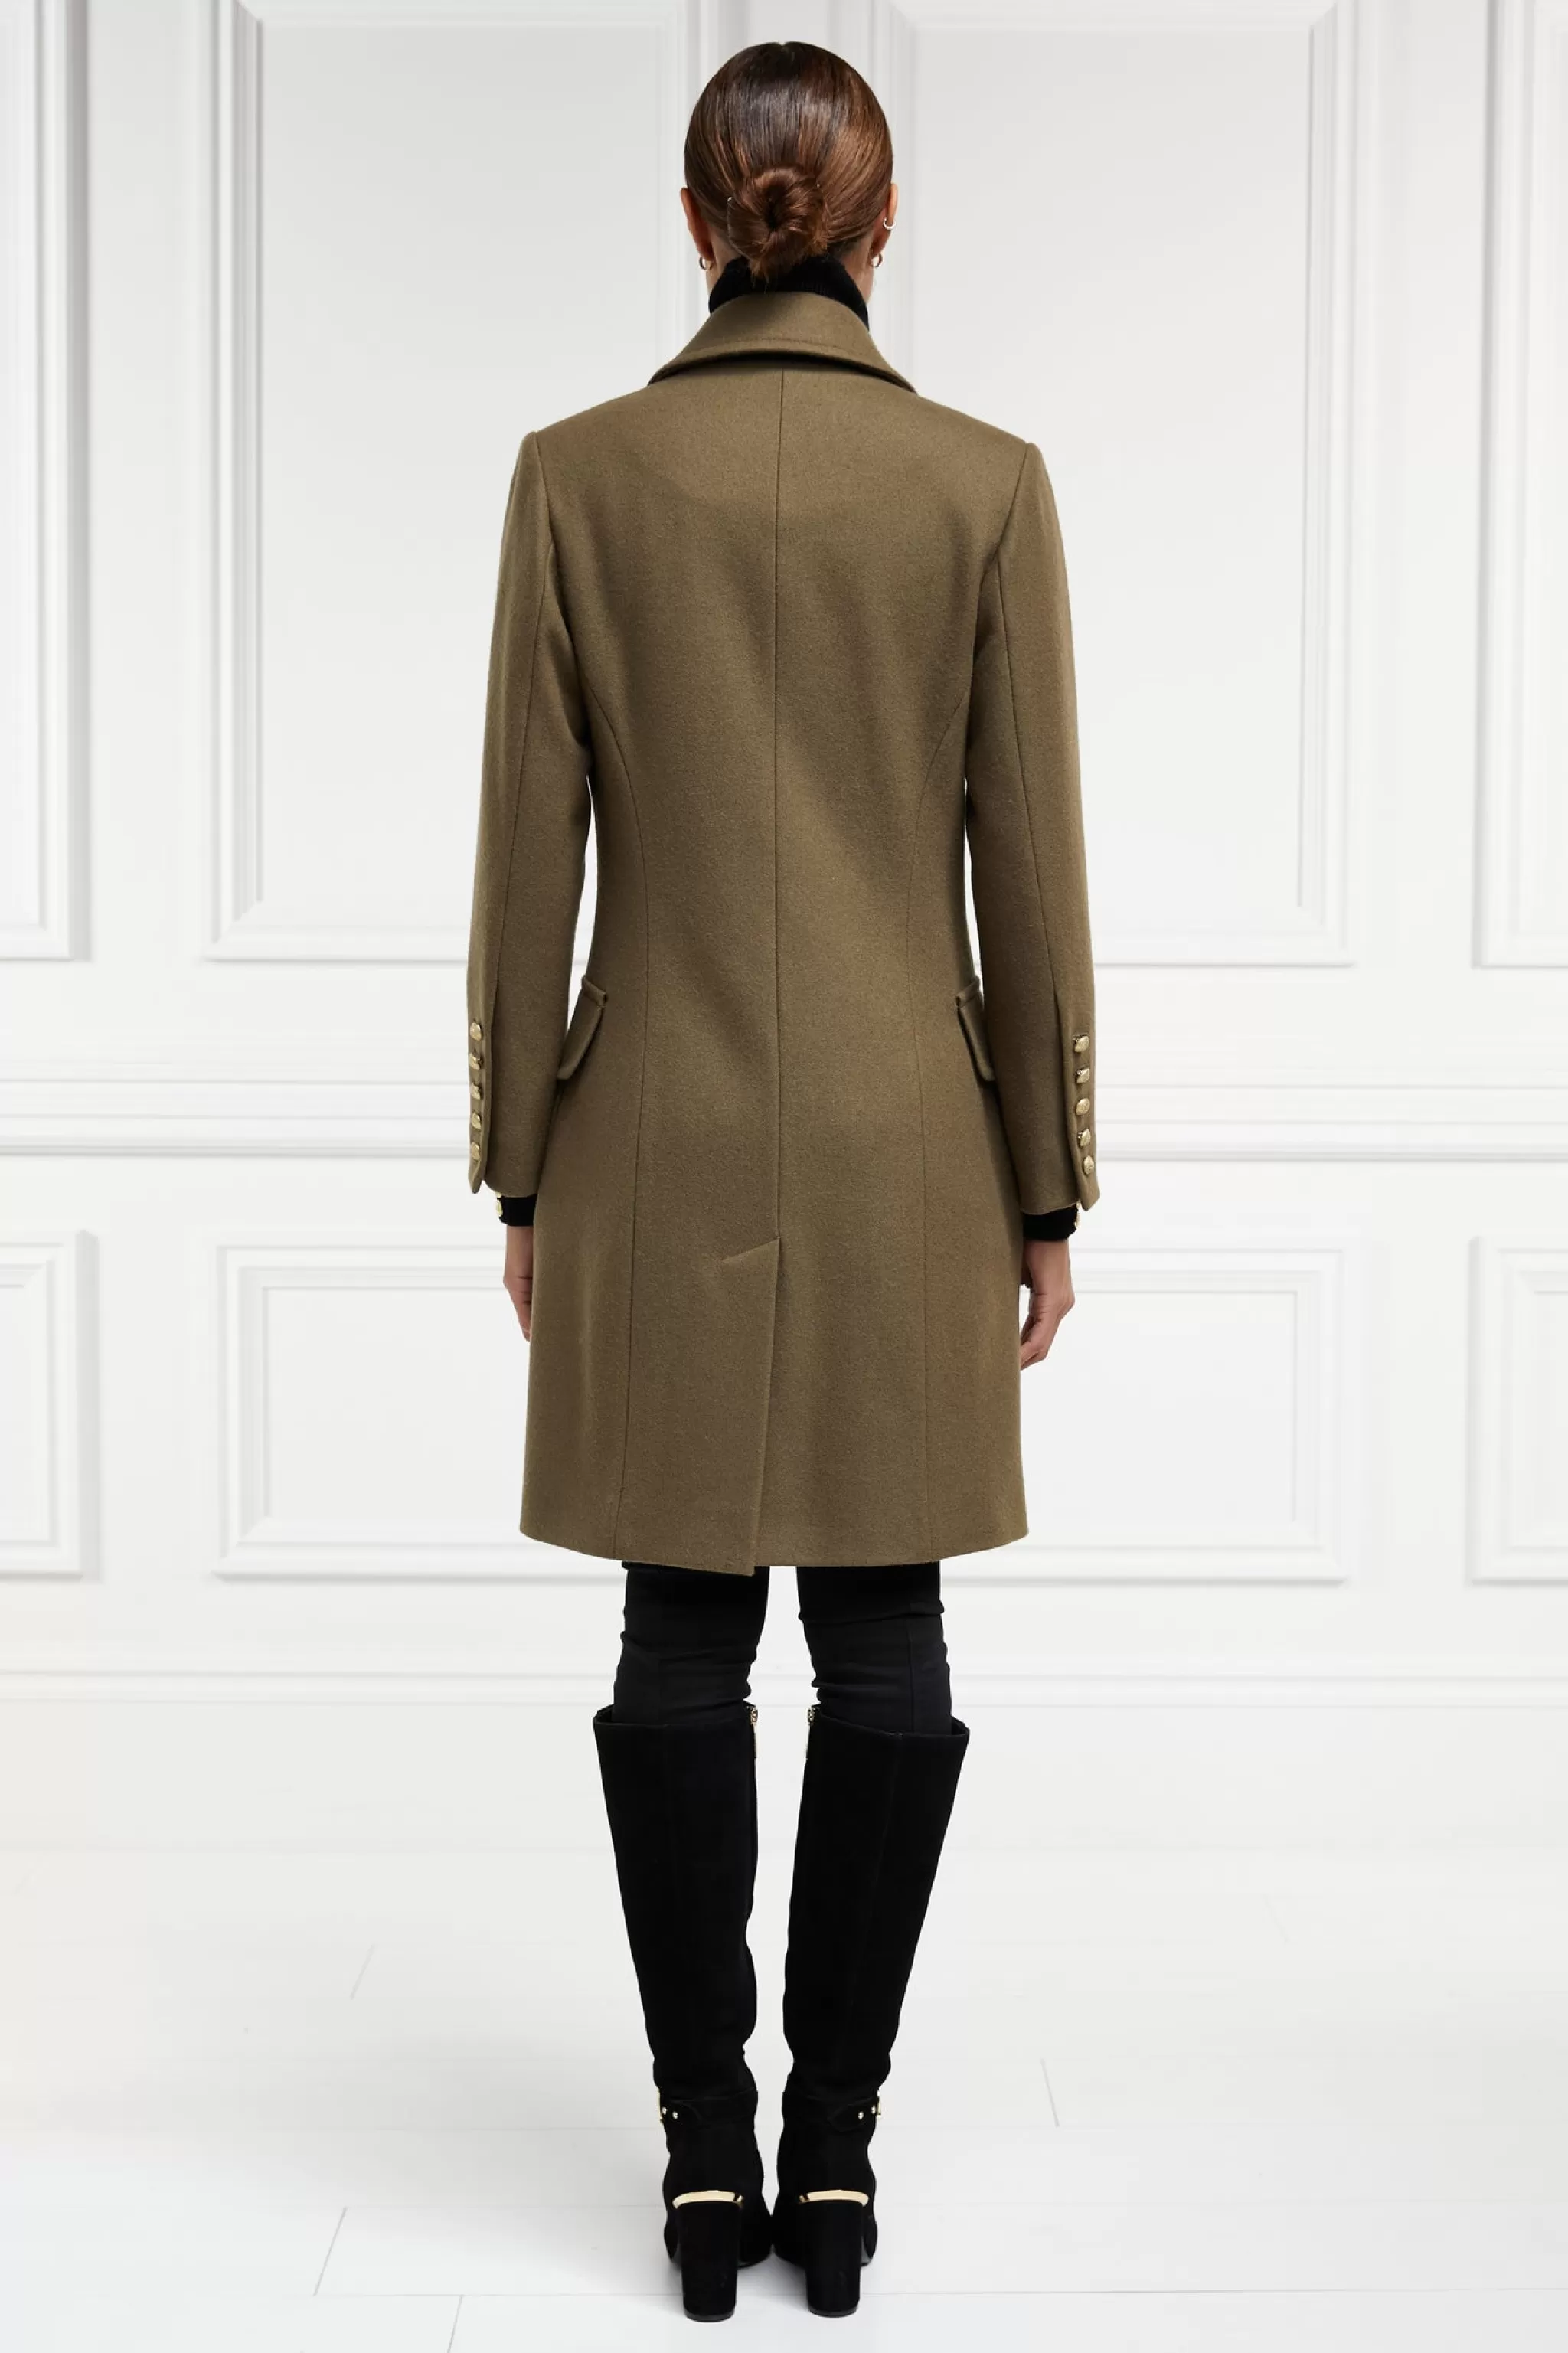 Imperial Military Coat>Holland Cooper Flash Sale